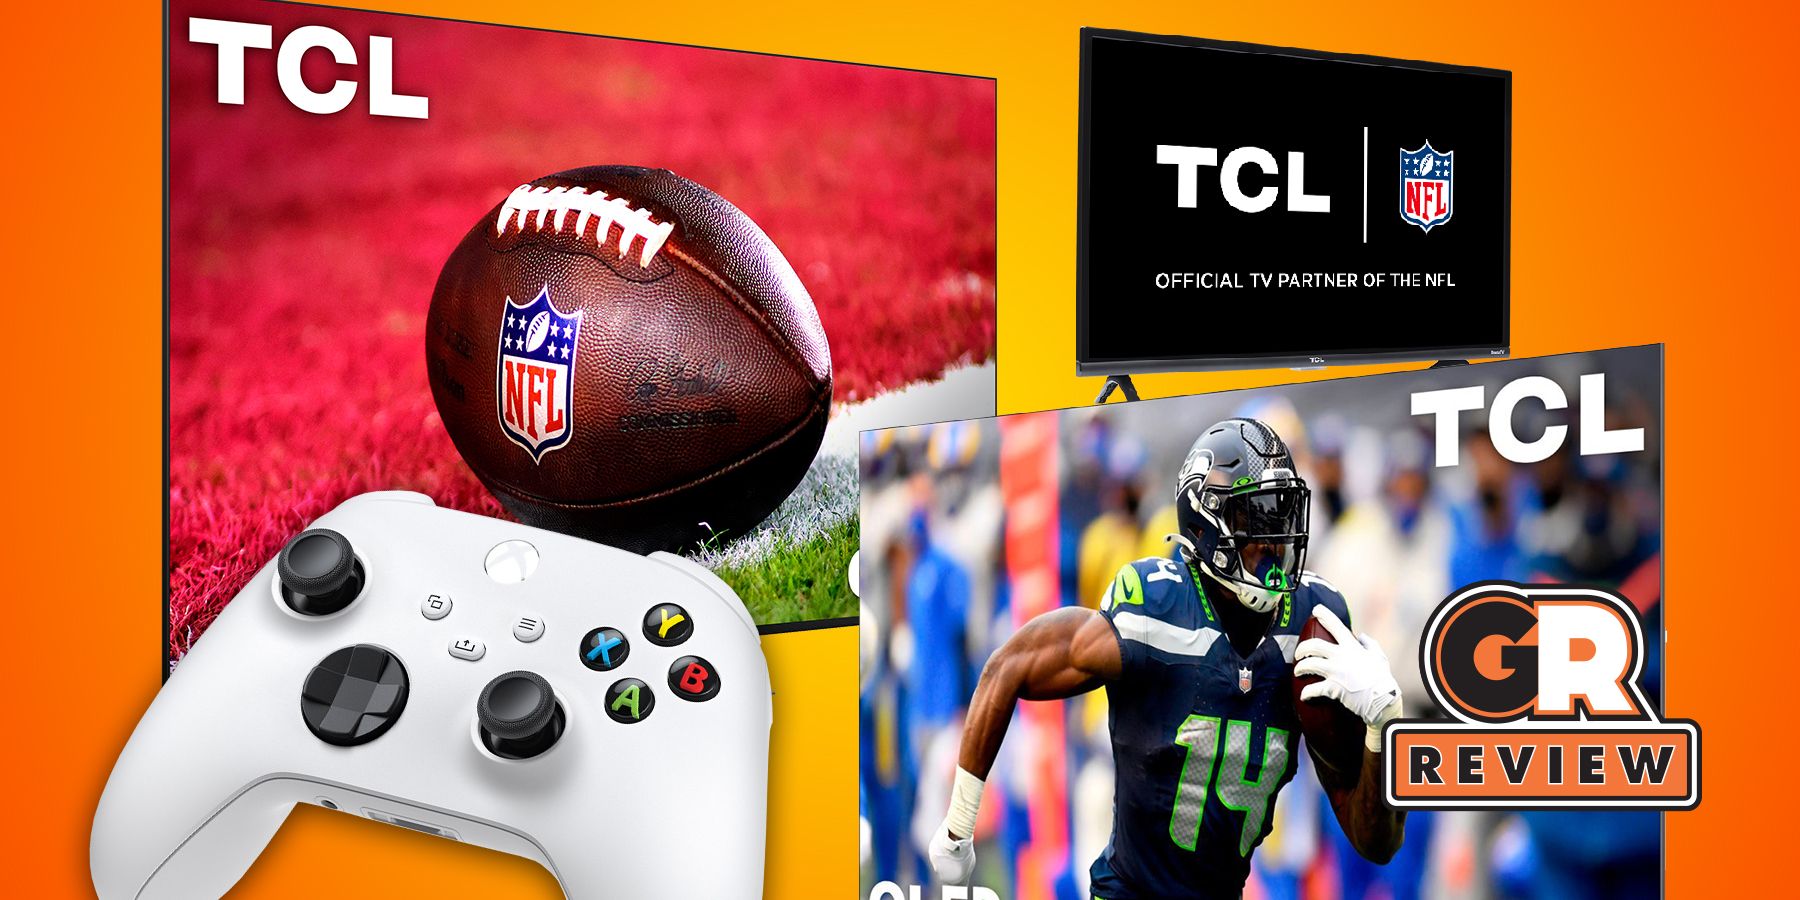 Are TCL TVs Good for Gaming?